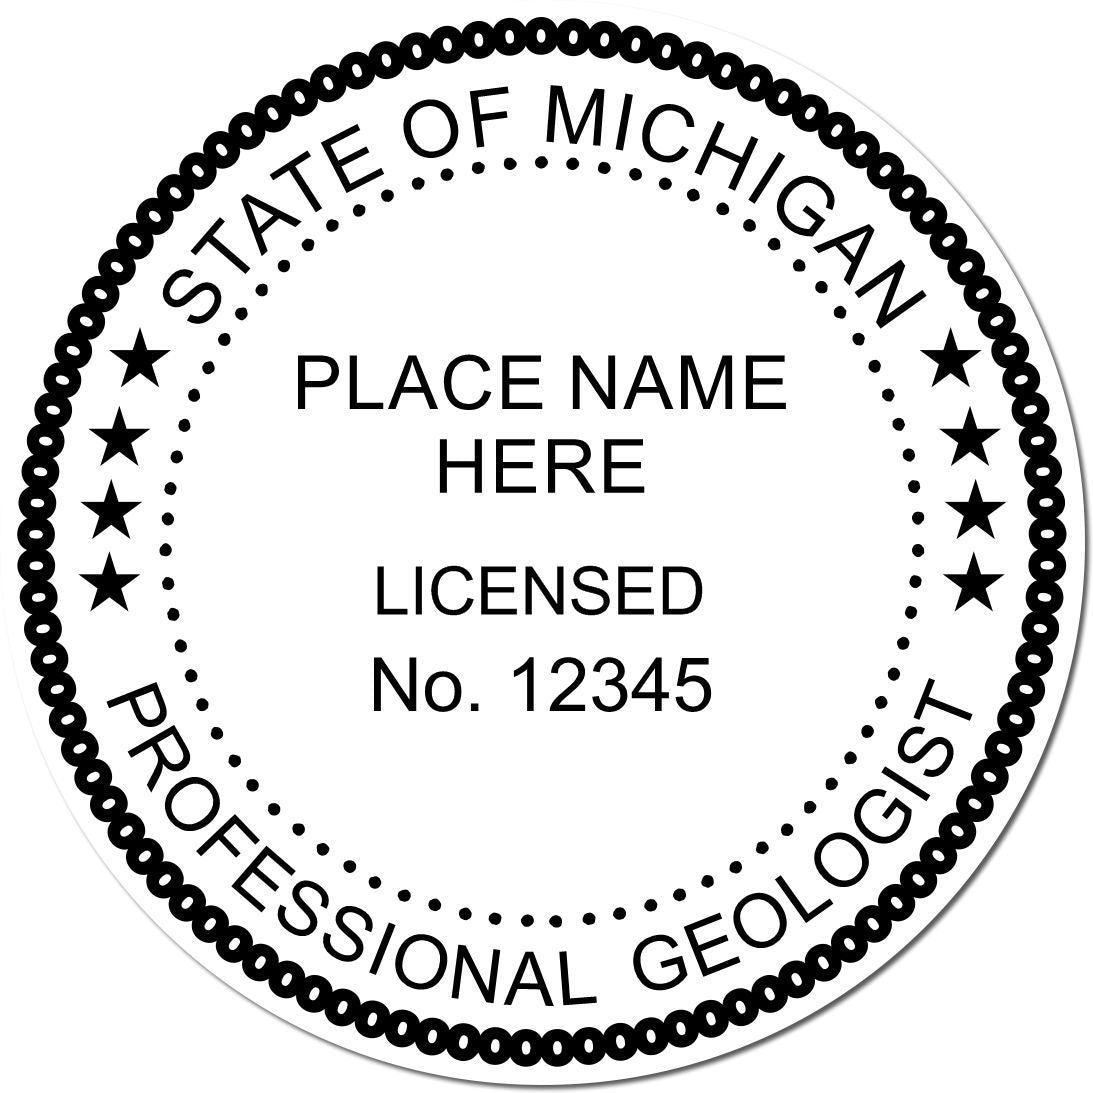 This paper is stamped with a sample imprint of the Digital Michigan Geologist Stamp, Electronic Seal for Michigan Geologist, signifying its quality and reliability.